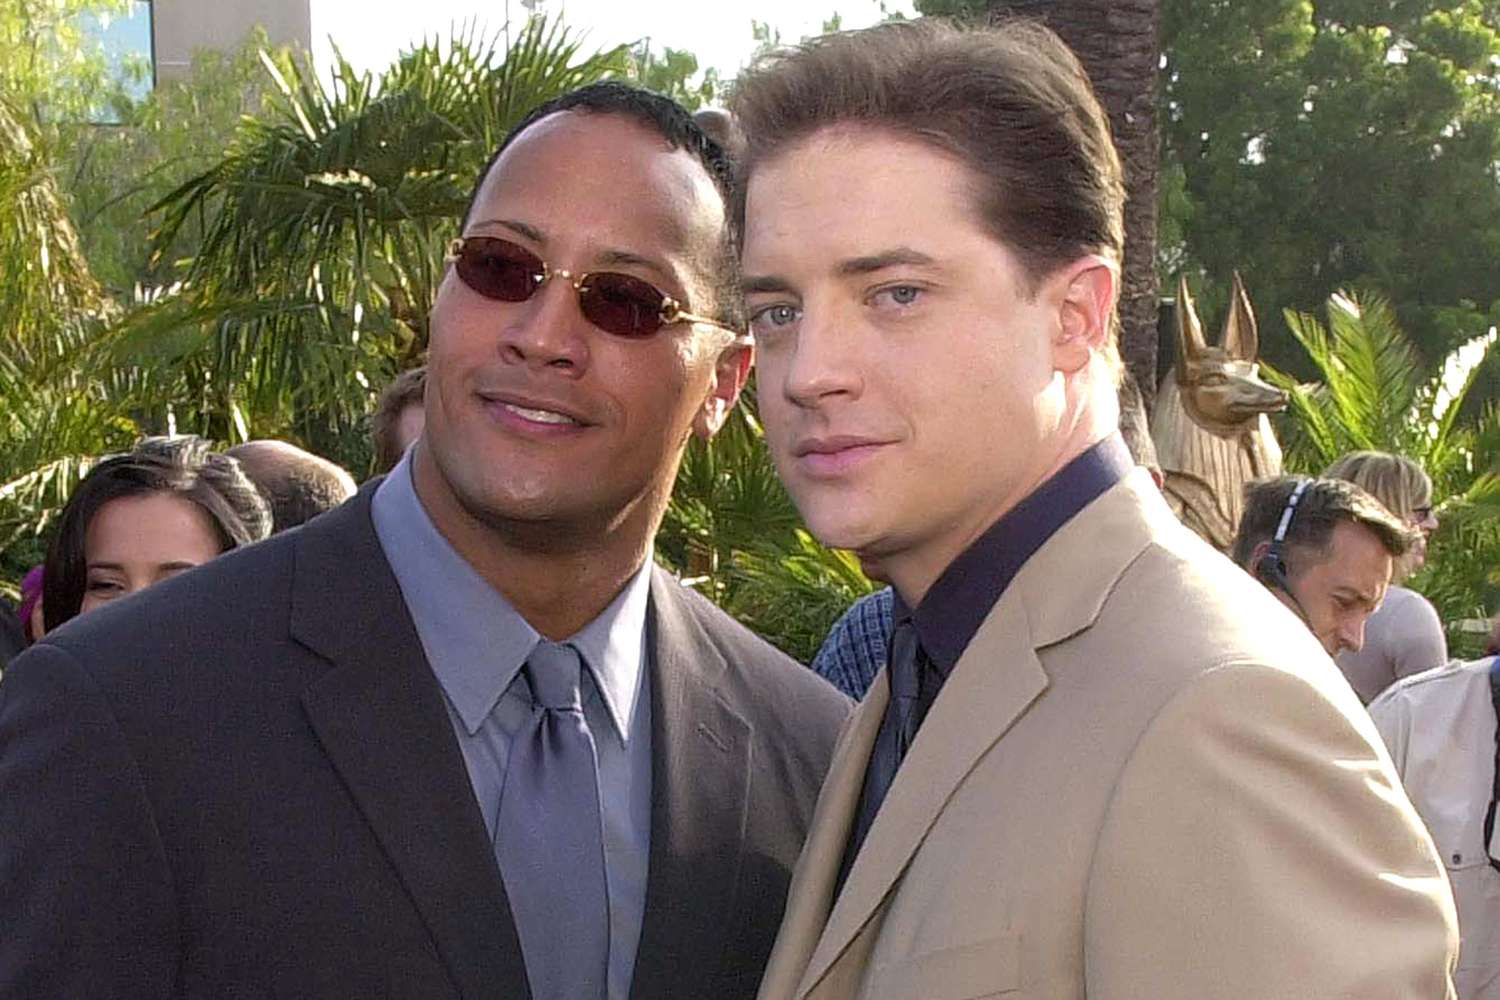 Brendan Fraser (R) poses with co-star WWF wrestler/actor The Rock (L) at the premiere of their new film "The Mummy Returns" at Universal City in Los Angeles, 29 April 2001